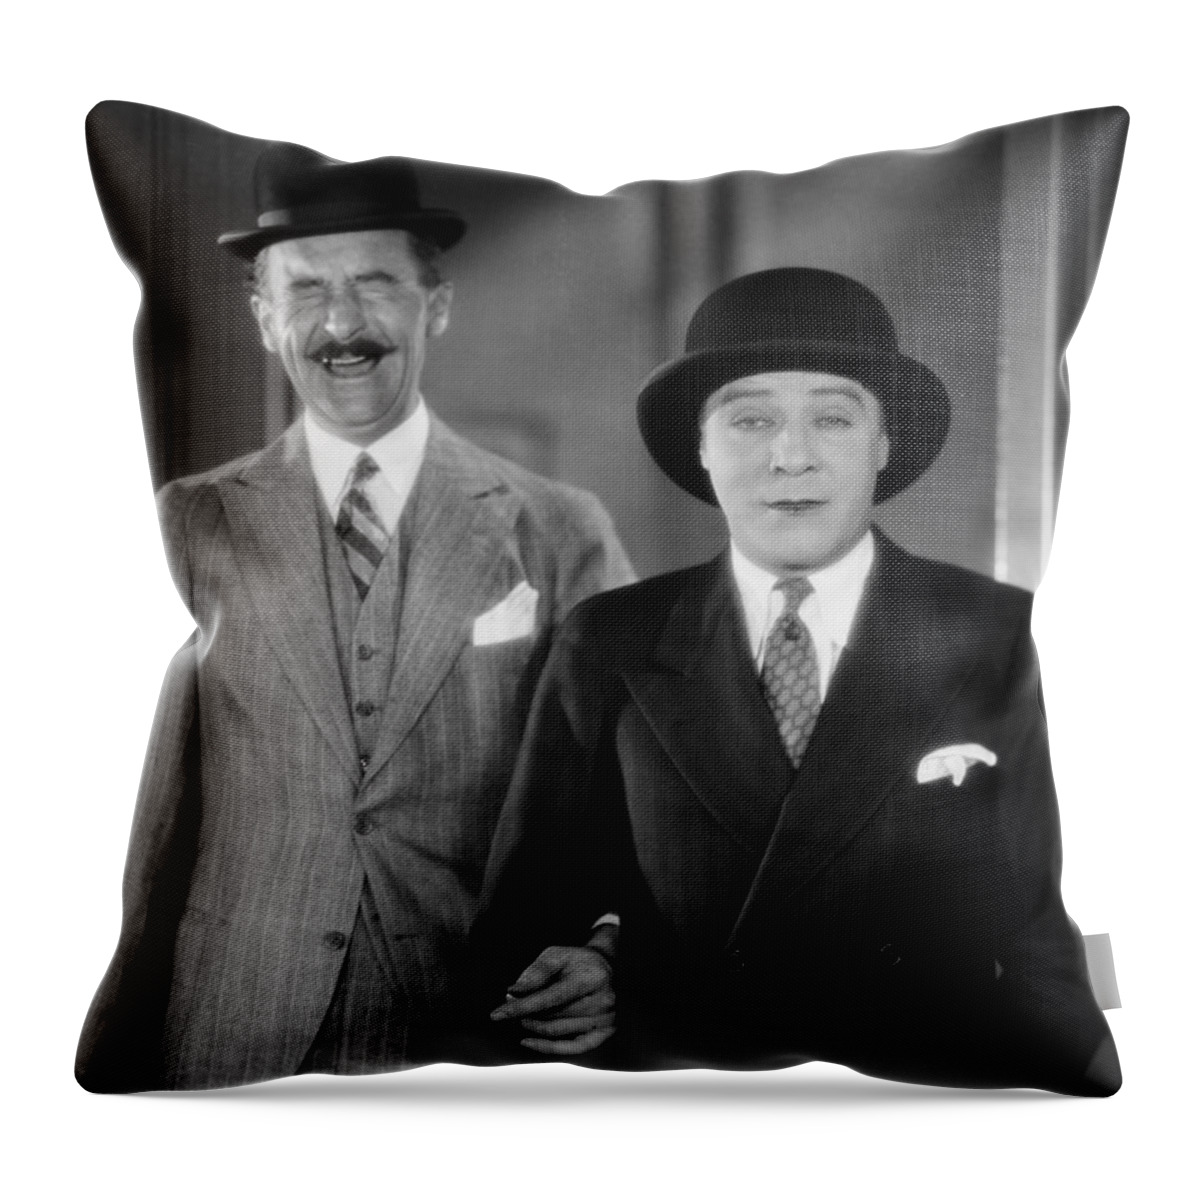 -hats- Throw Pillow featuring the photograph Silent Film Still #6 by Granger